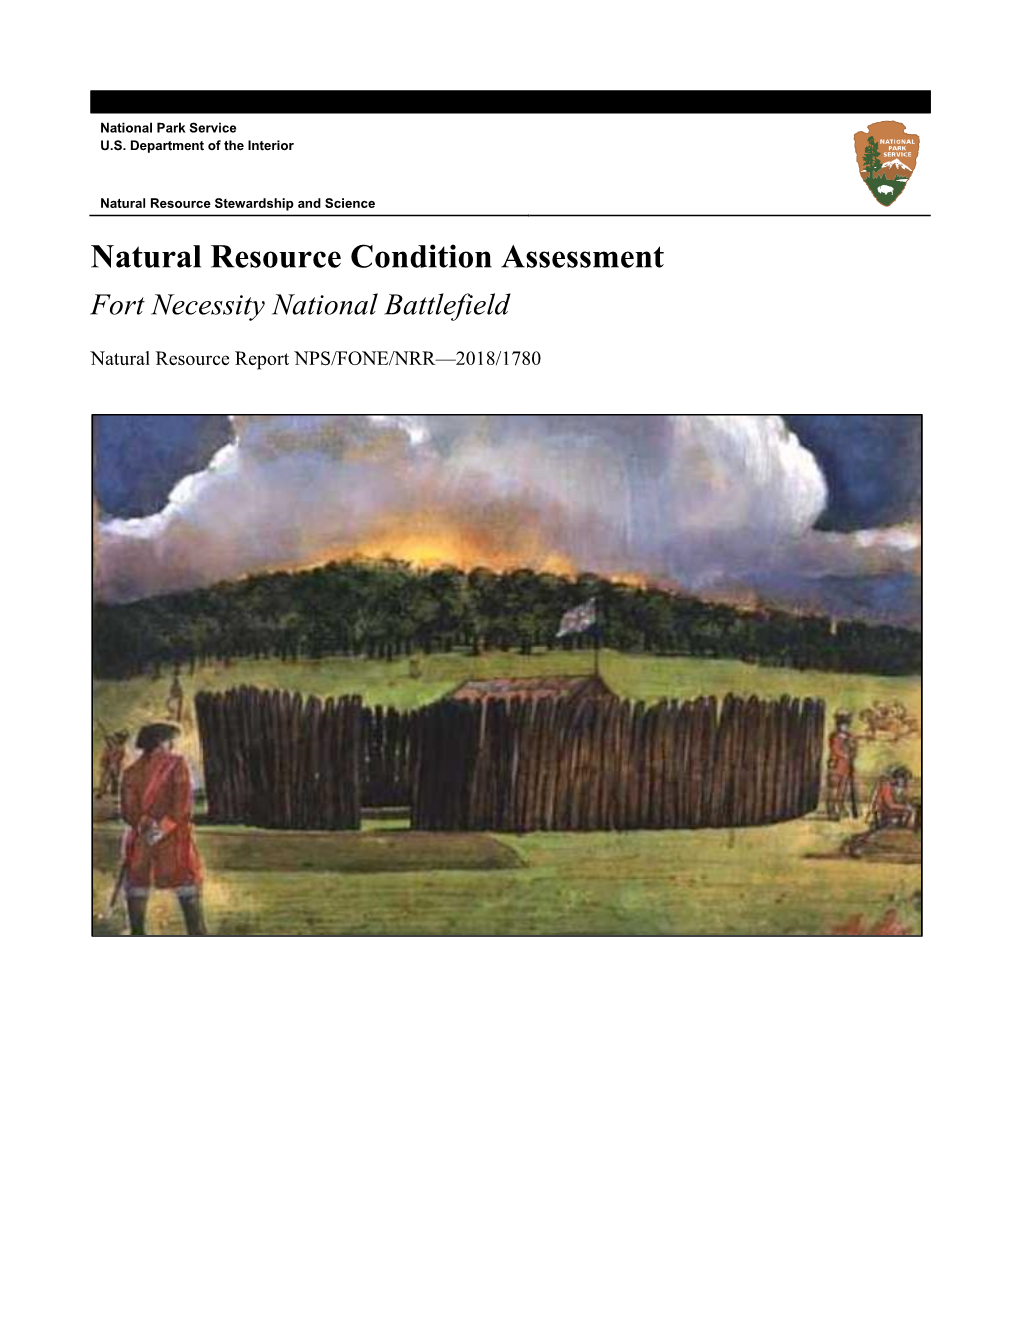 Natural Resource Condition Assessment: Fort Necessity National Battlefield